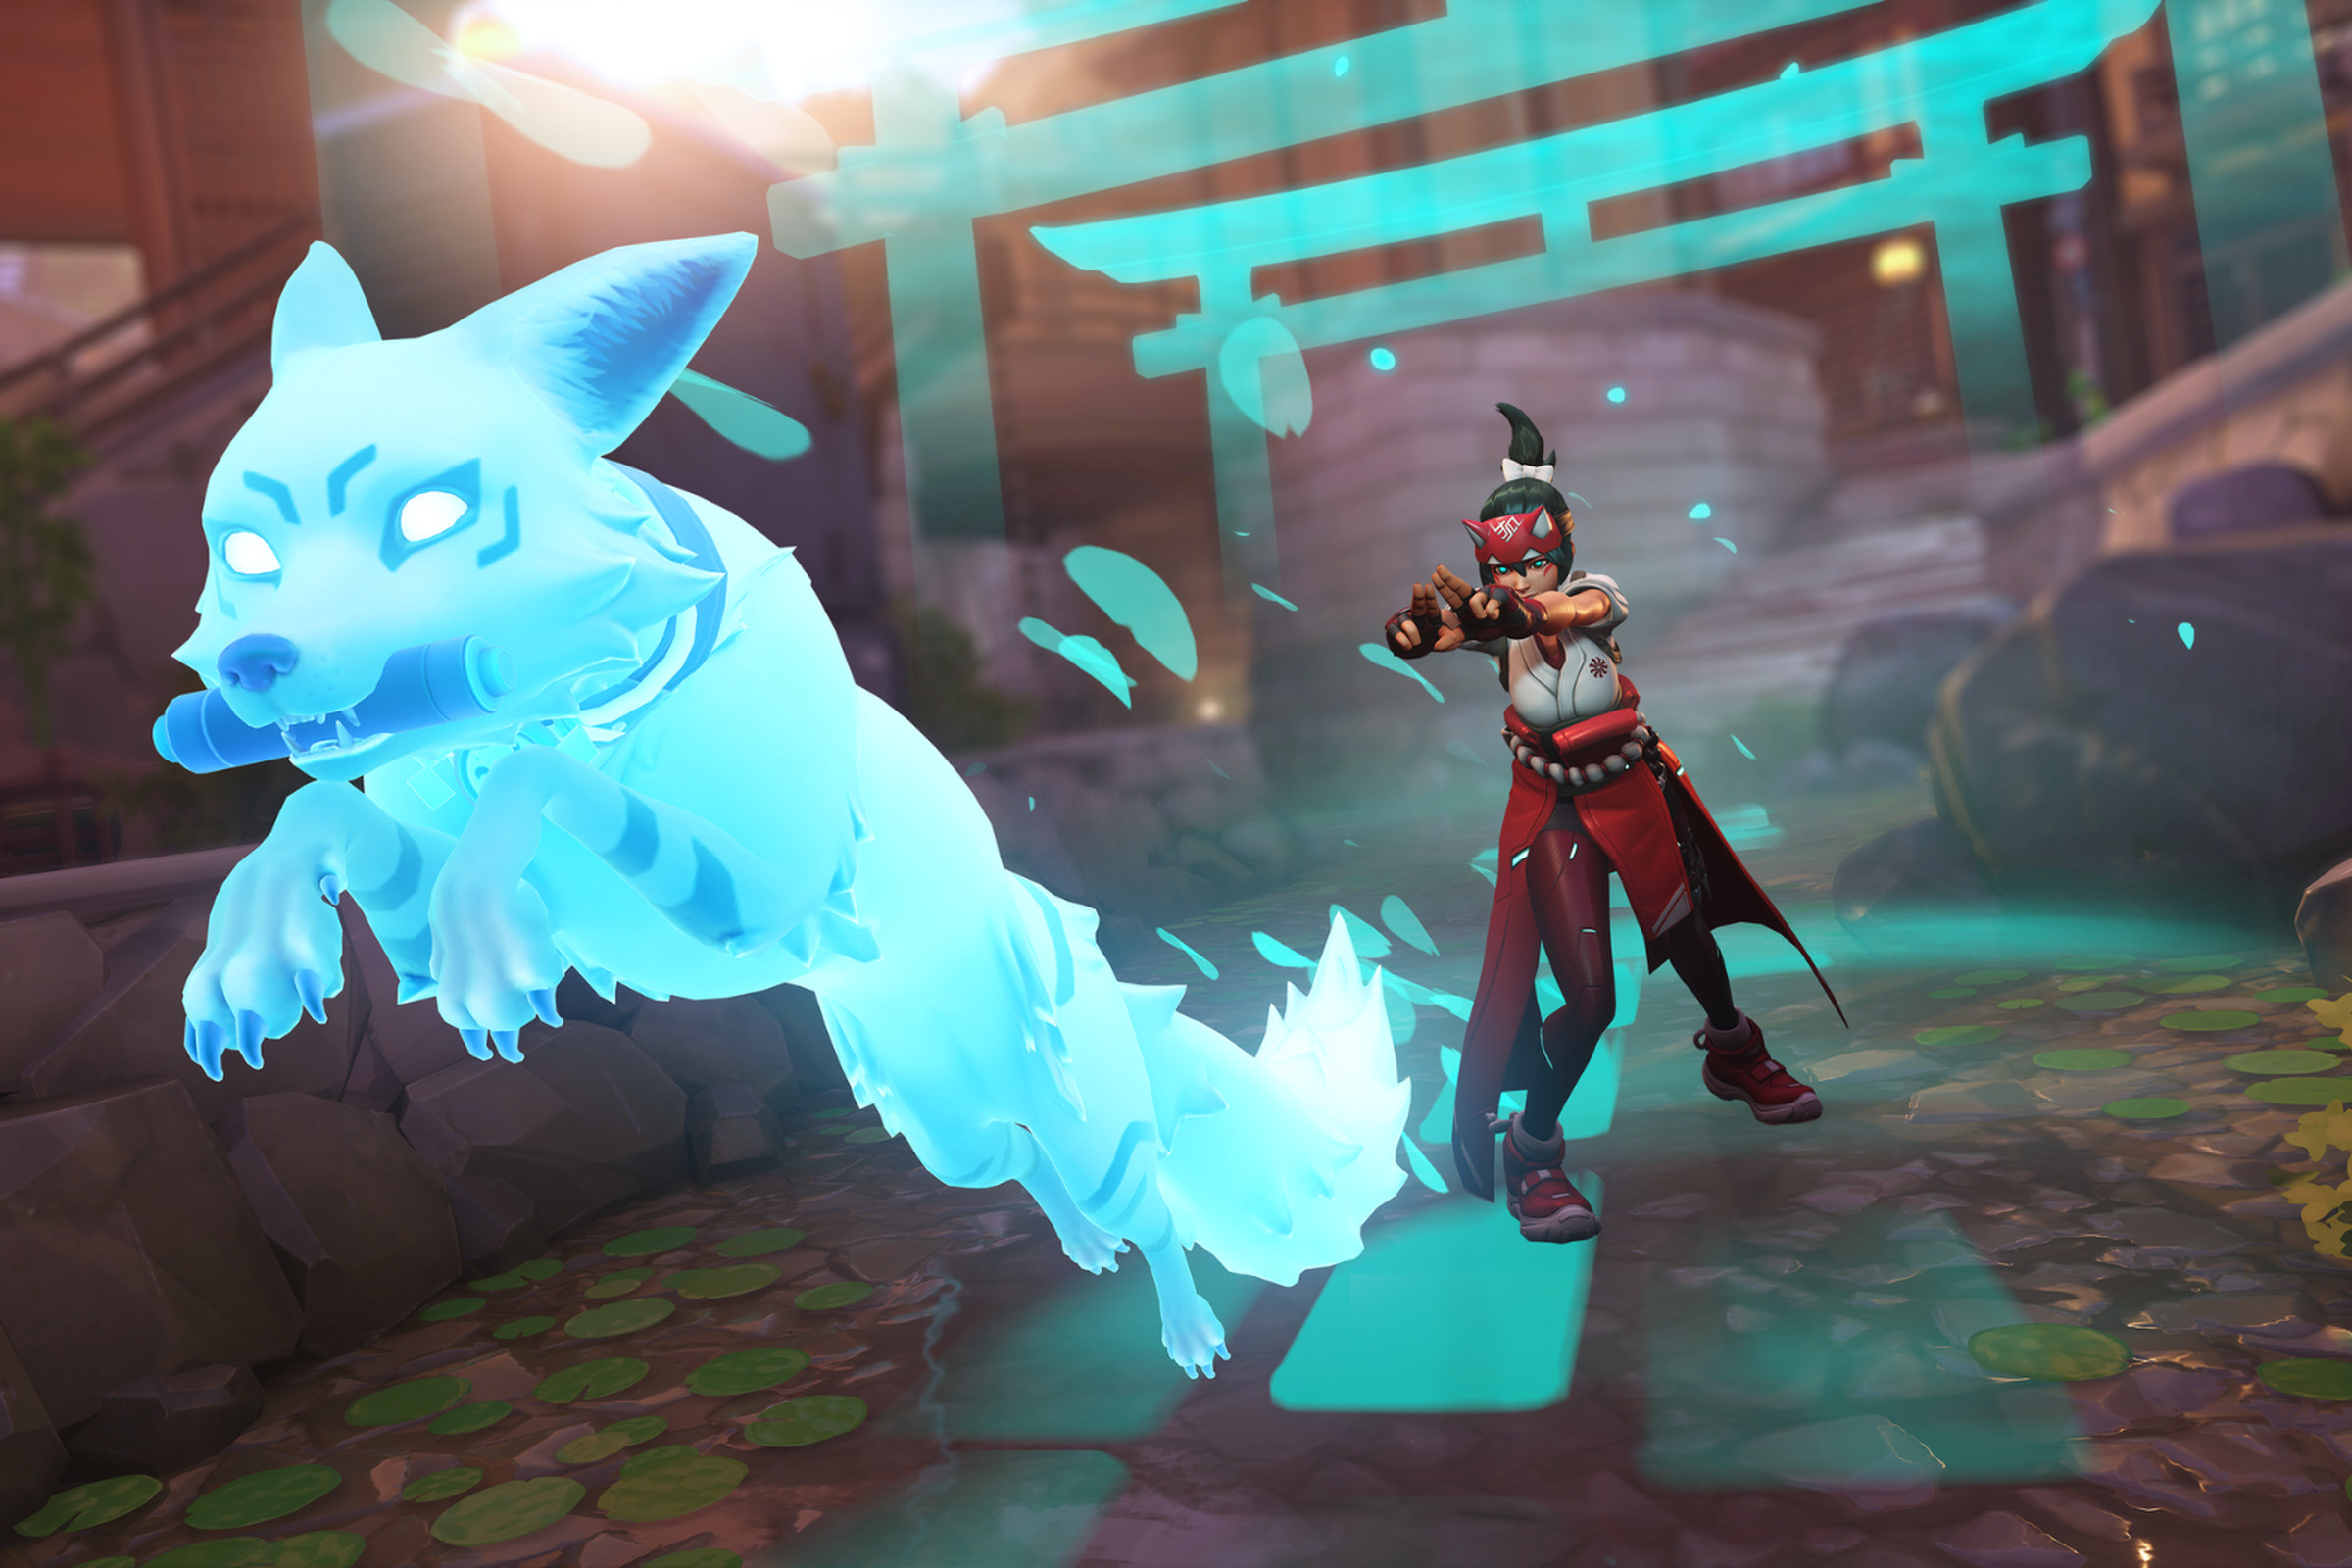 Screenshot from Overwatch 2 featuring the new hero Kiriko, a Japanese ninja clad in a red and white shrine maiden outfit modified to look like contemporary streetwear sending forth her spectral blue colored fox spirit